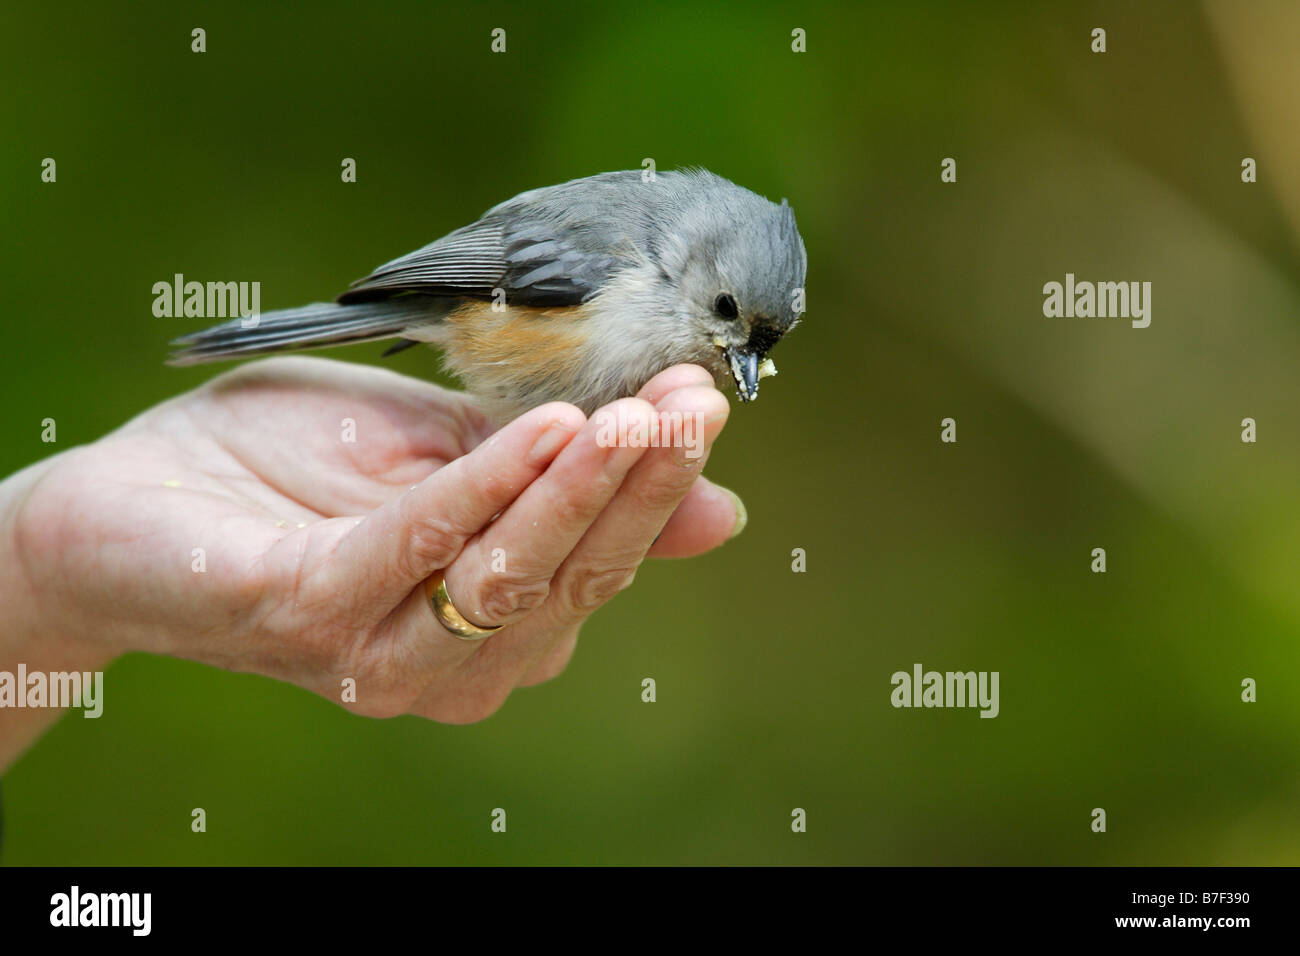 Tufted Titmouse Baeolophus bicolor bicolor being feed by bird watcher Stock Photo